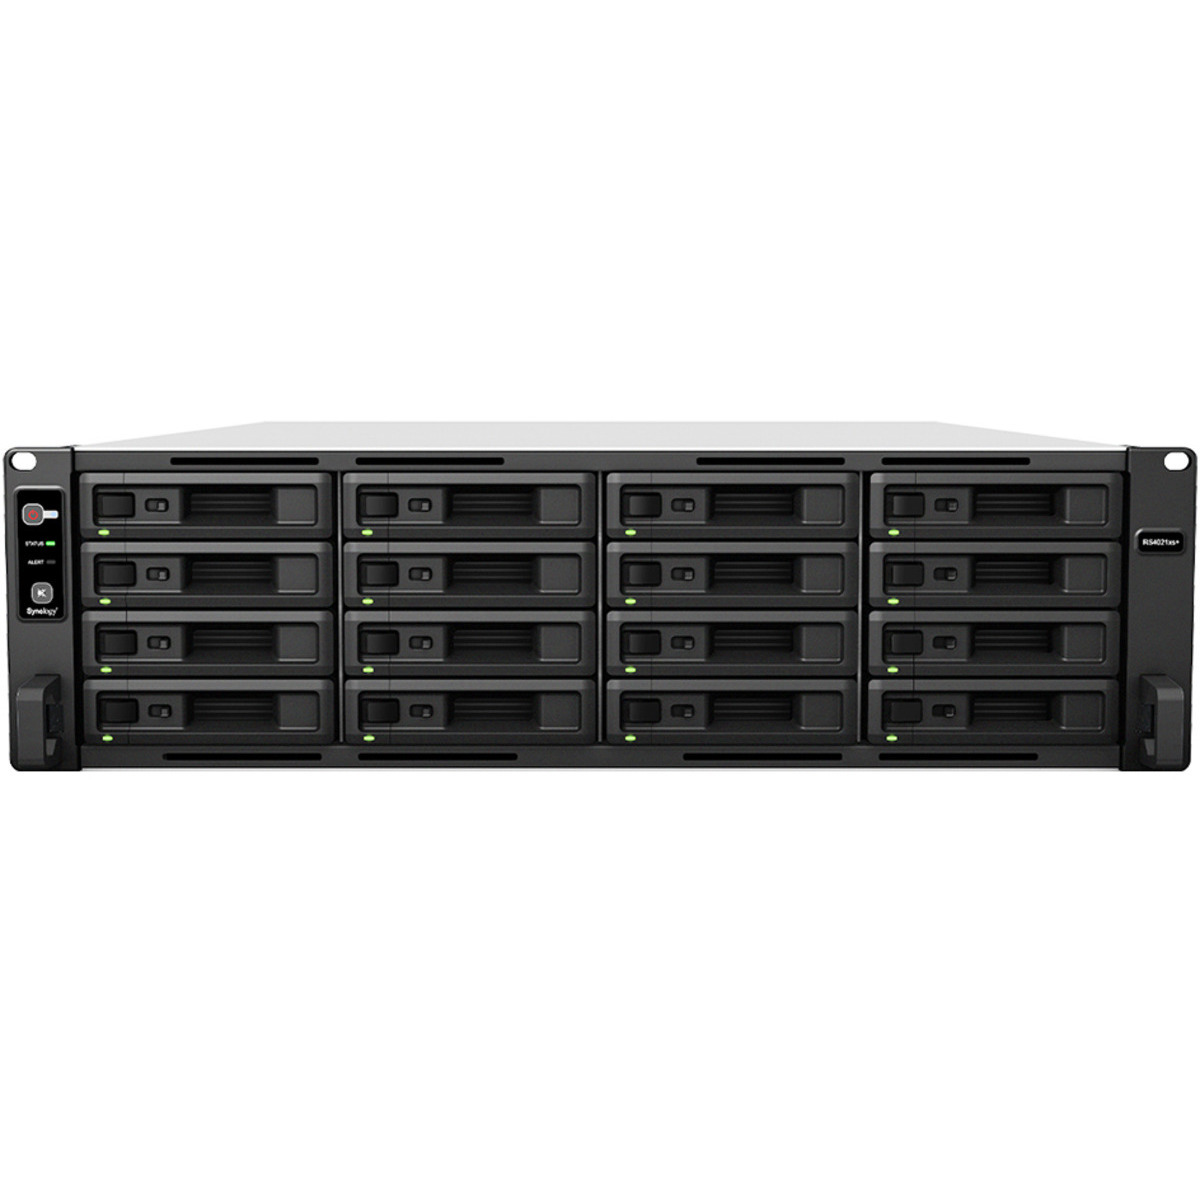 Synology RackStation RS4021xs+ 20tb 16-Bay RackMount Large Business / Enterprise NAS - Network Attached Storage Device 10x2tb Western Digital Red Plus WD20EFZX 3.5 5400rpm SATA 6Gb/s HDD NAS Class Drives Installed - Burn-In Tested RackStation RS4021xs+